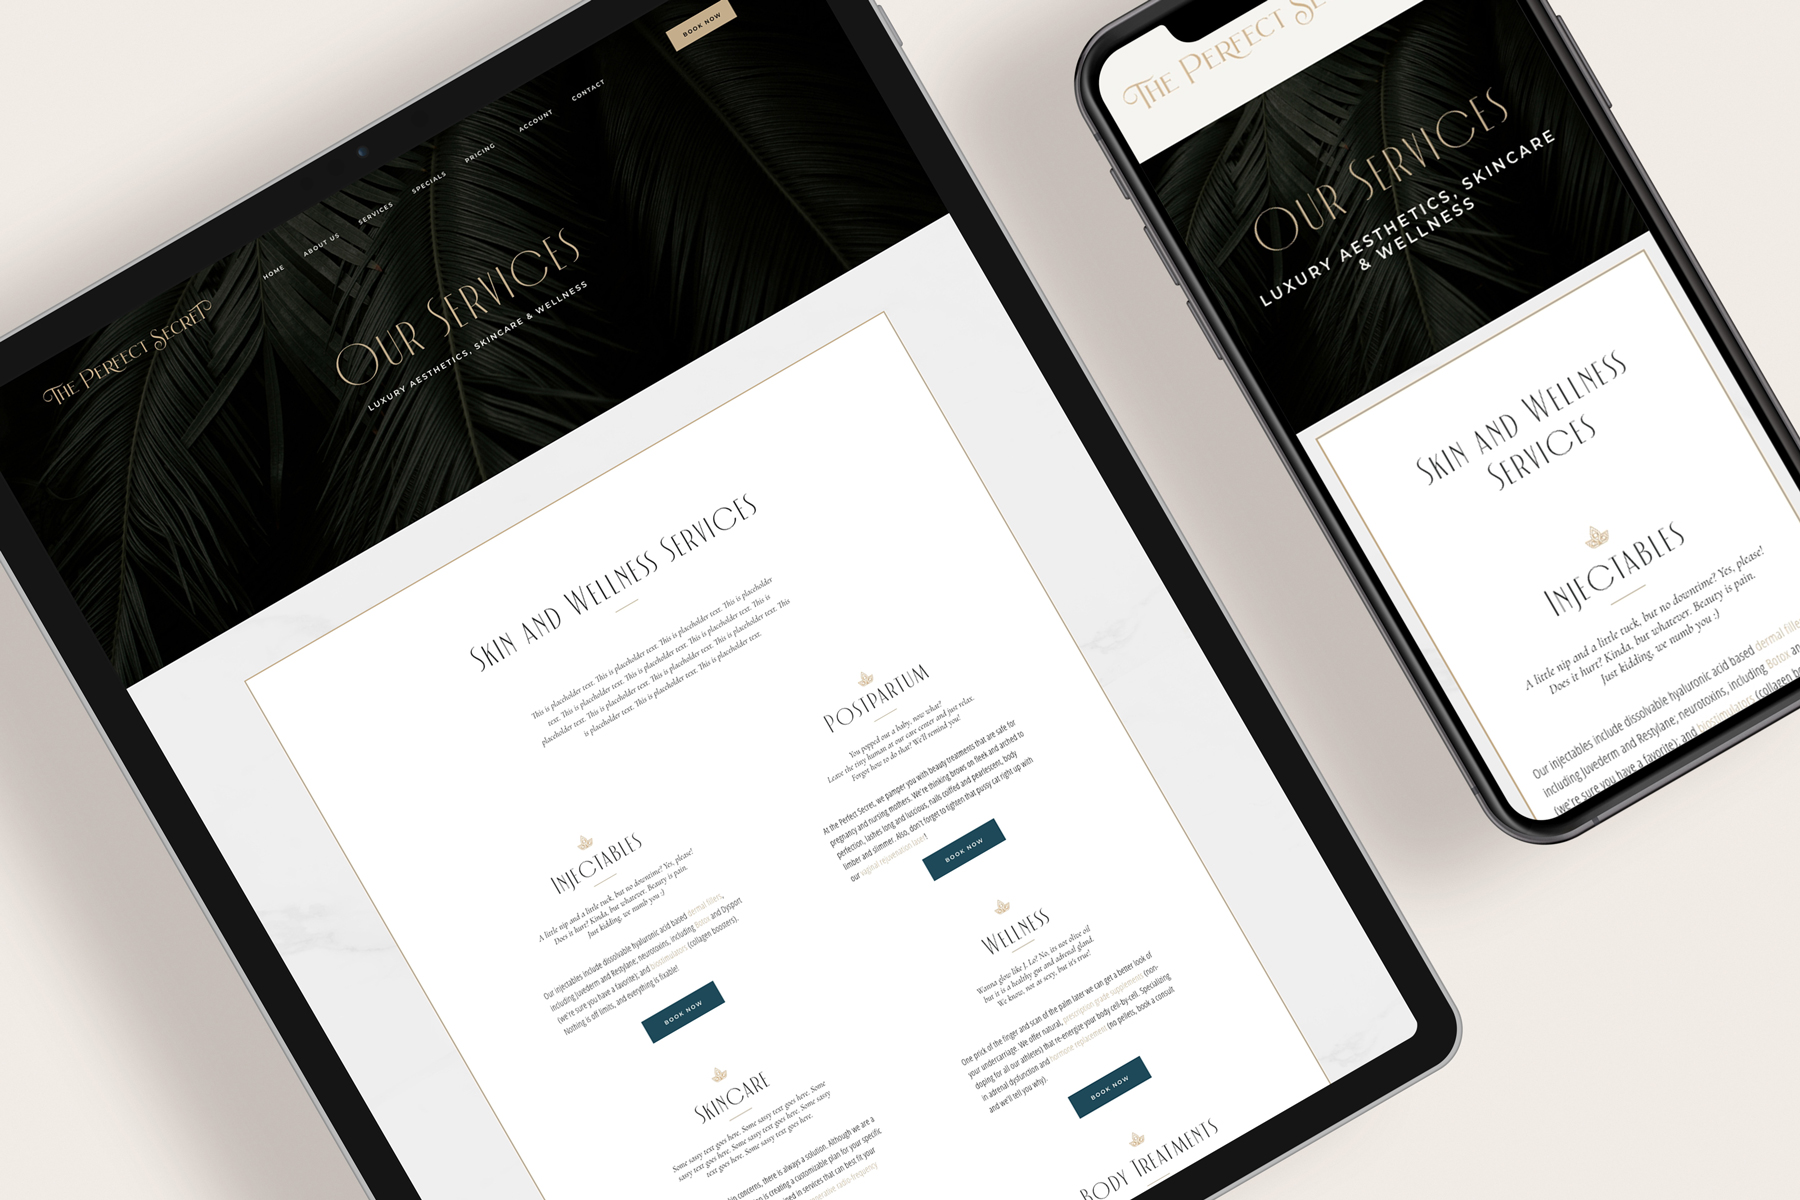 iPad and iPhone mockups for the website of It's the Perfect Secret med spa